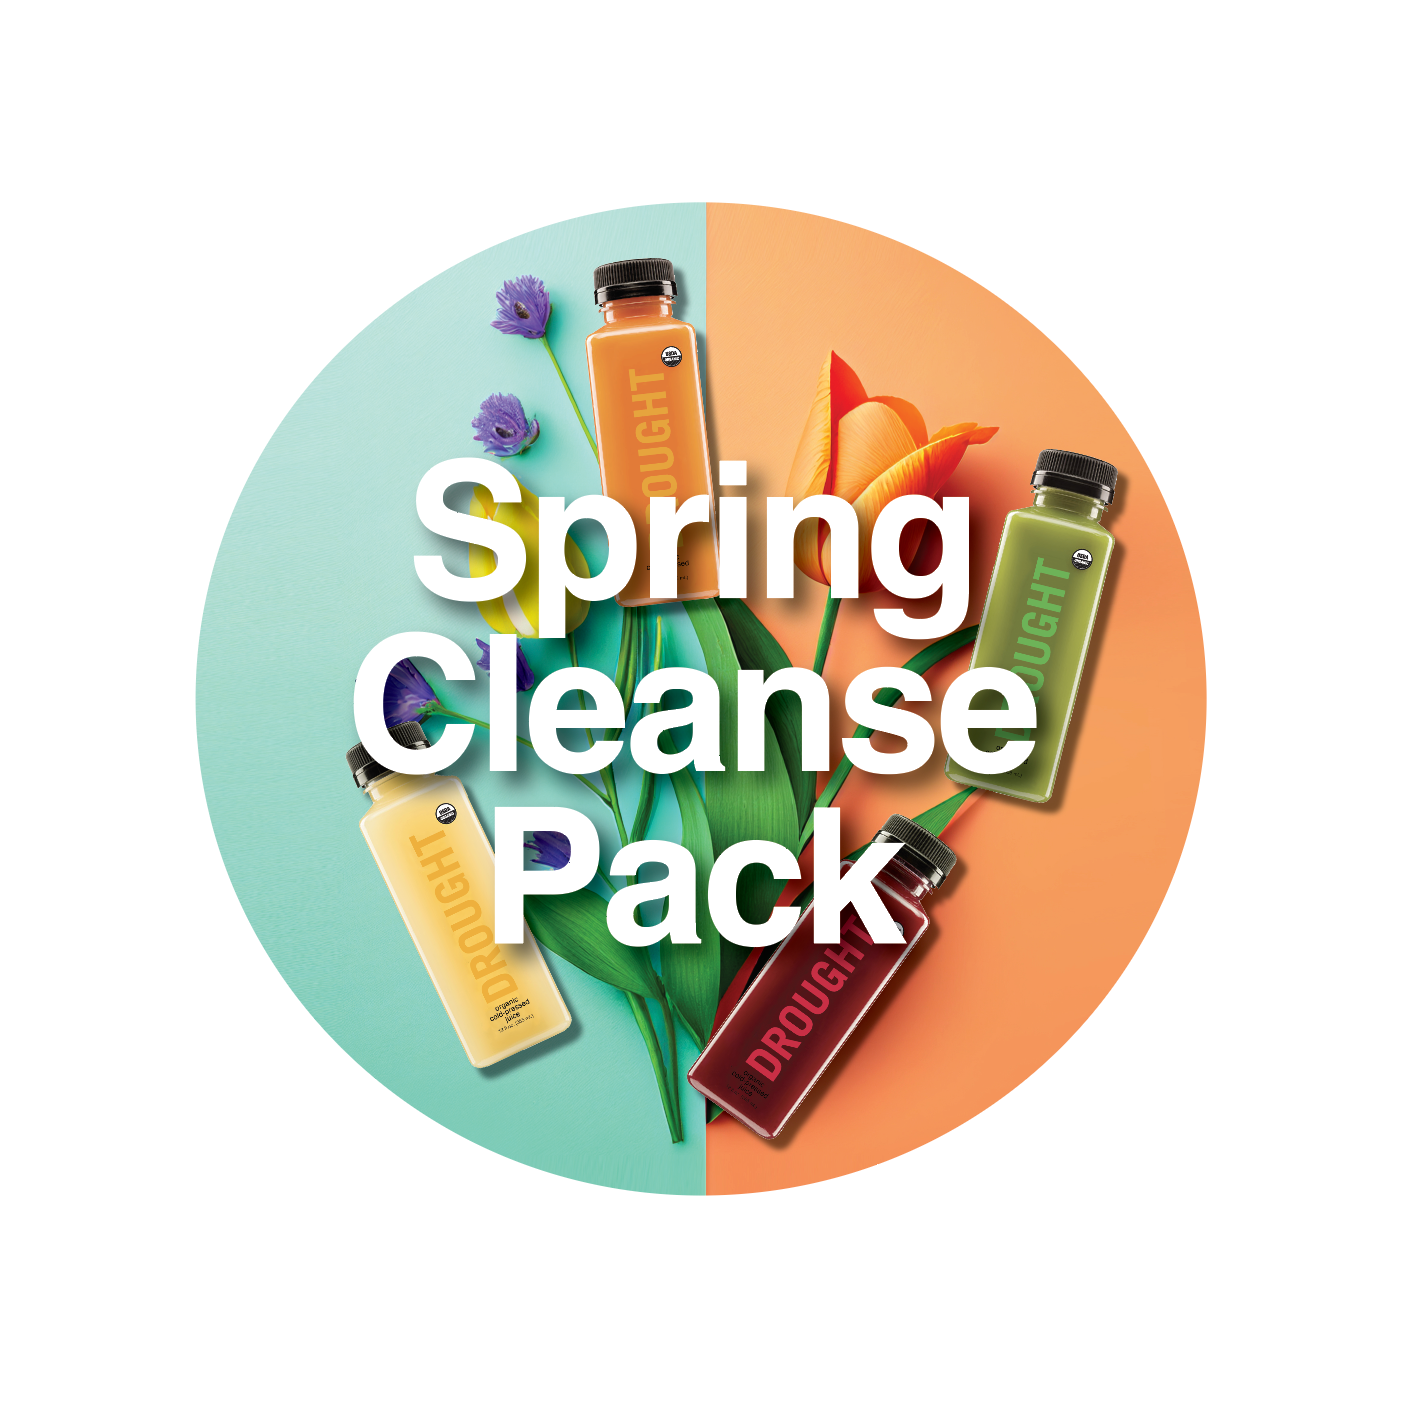 Spring Cleanse Pack